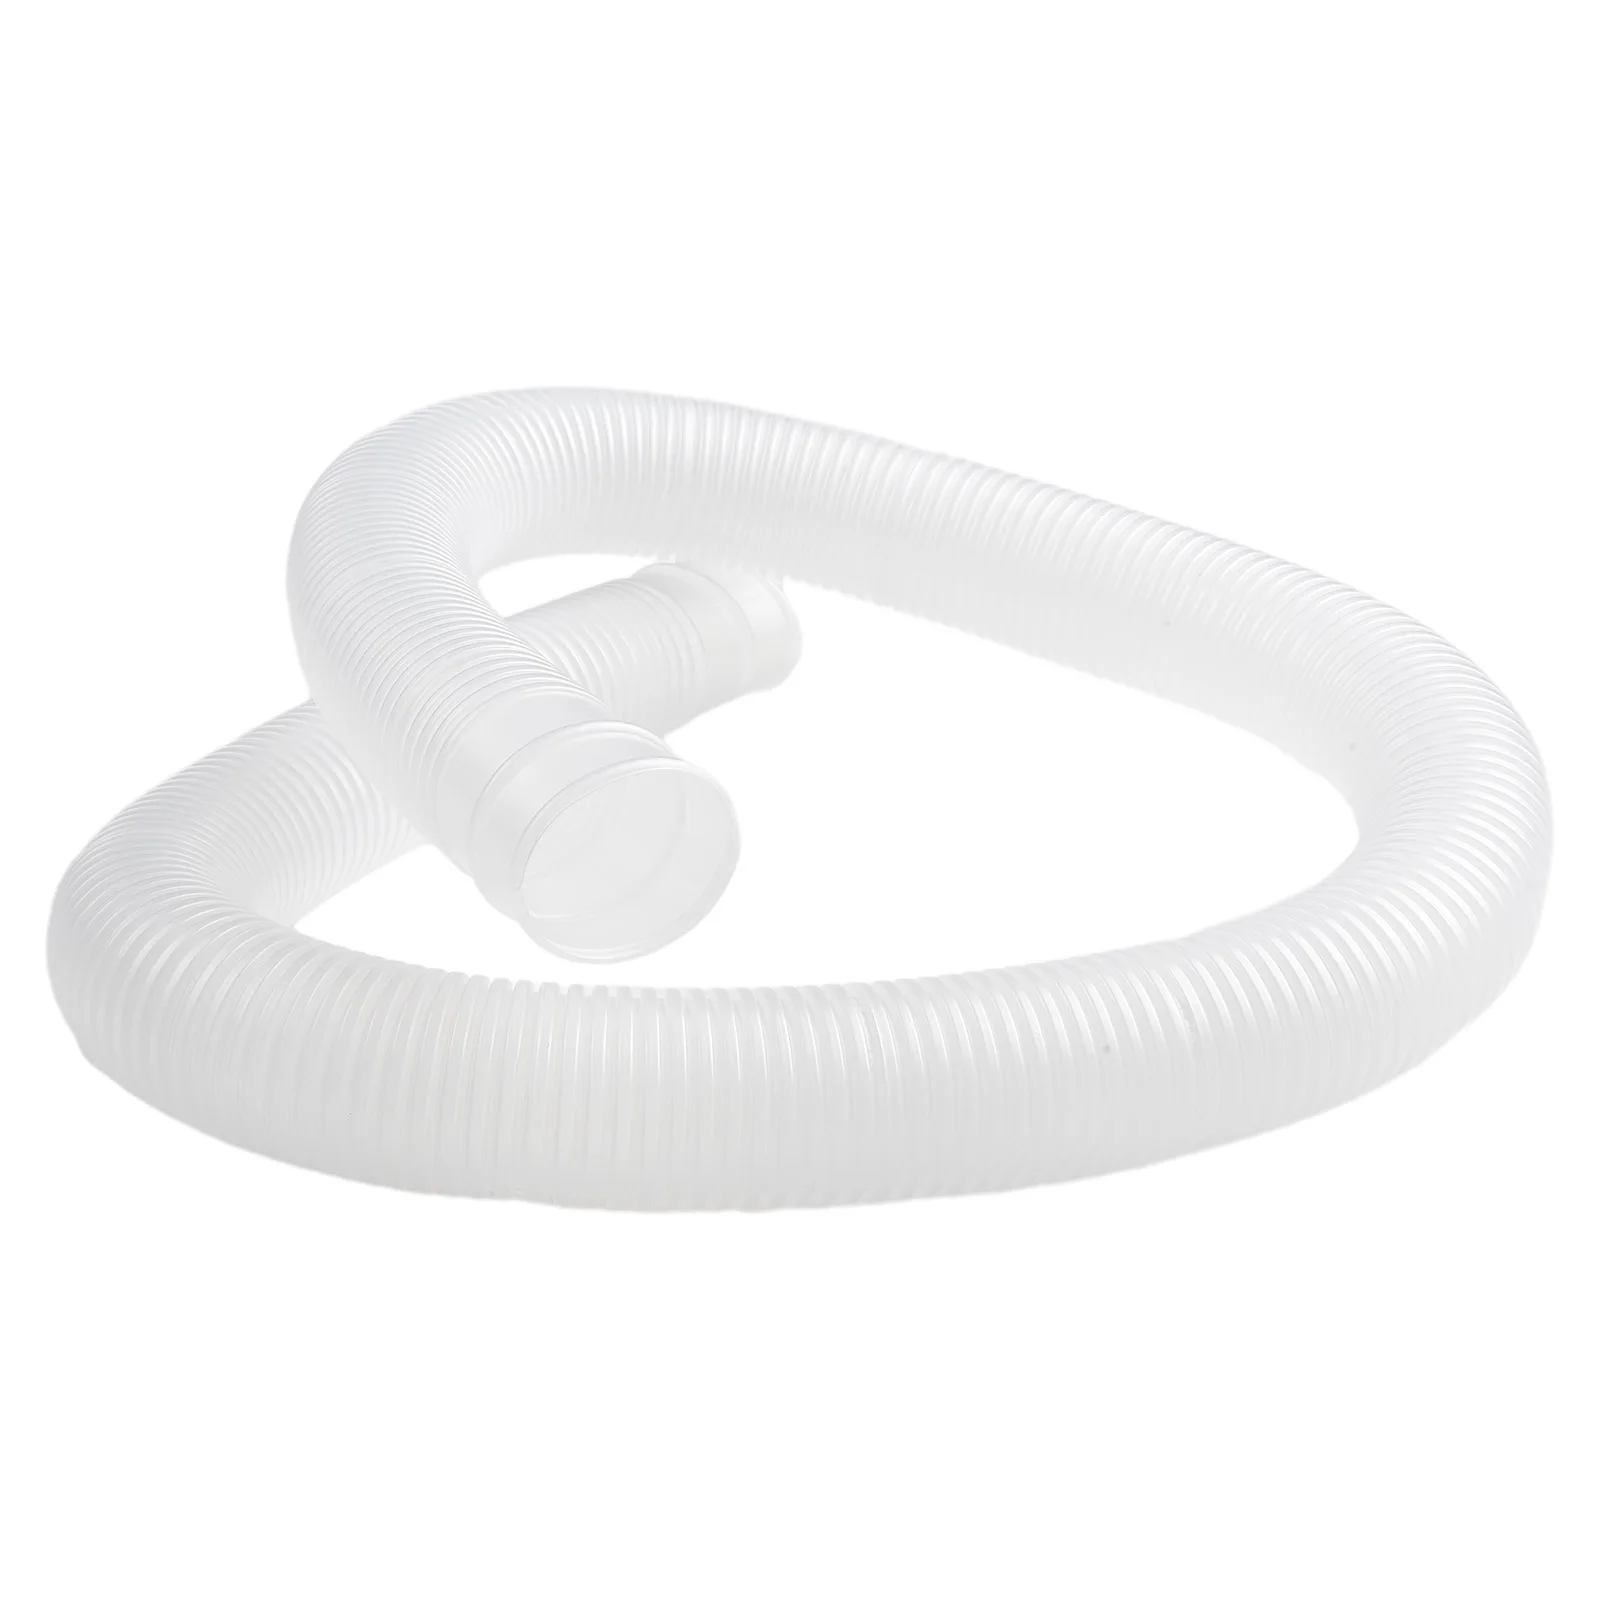 

2pc Pool Hoses For Intex 1-1/4 Inch Accessory Hose Above Ground Swimming Pool Pump Replacement Plastic 1.25\" Diameter Hose